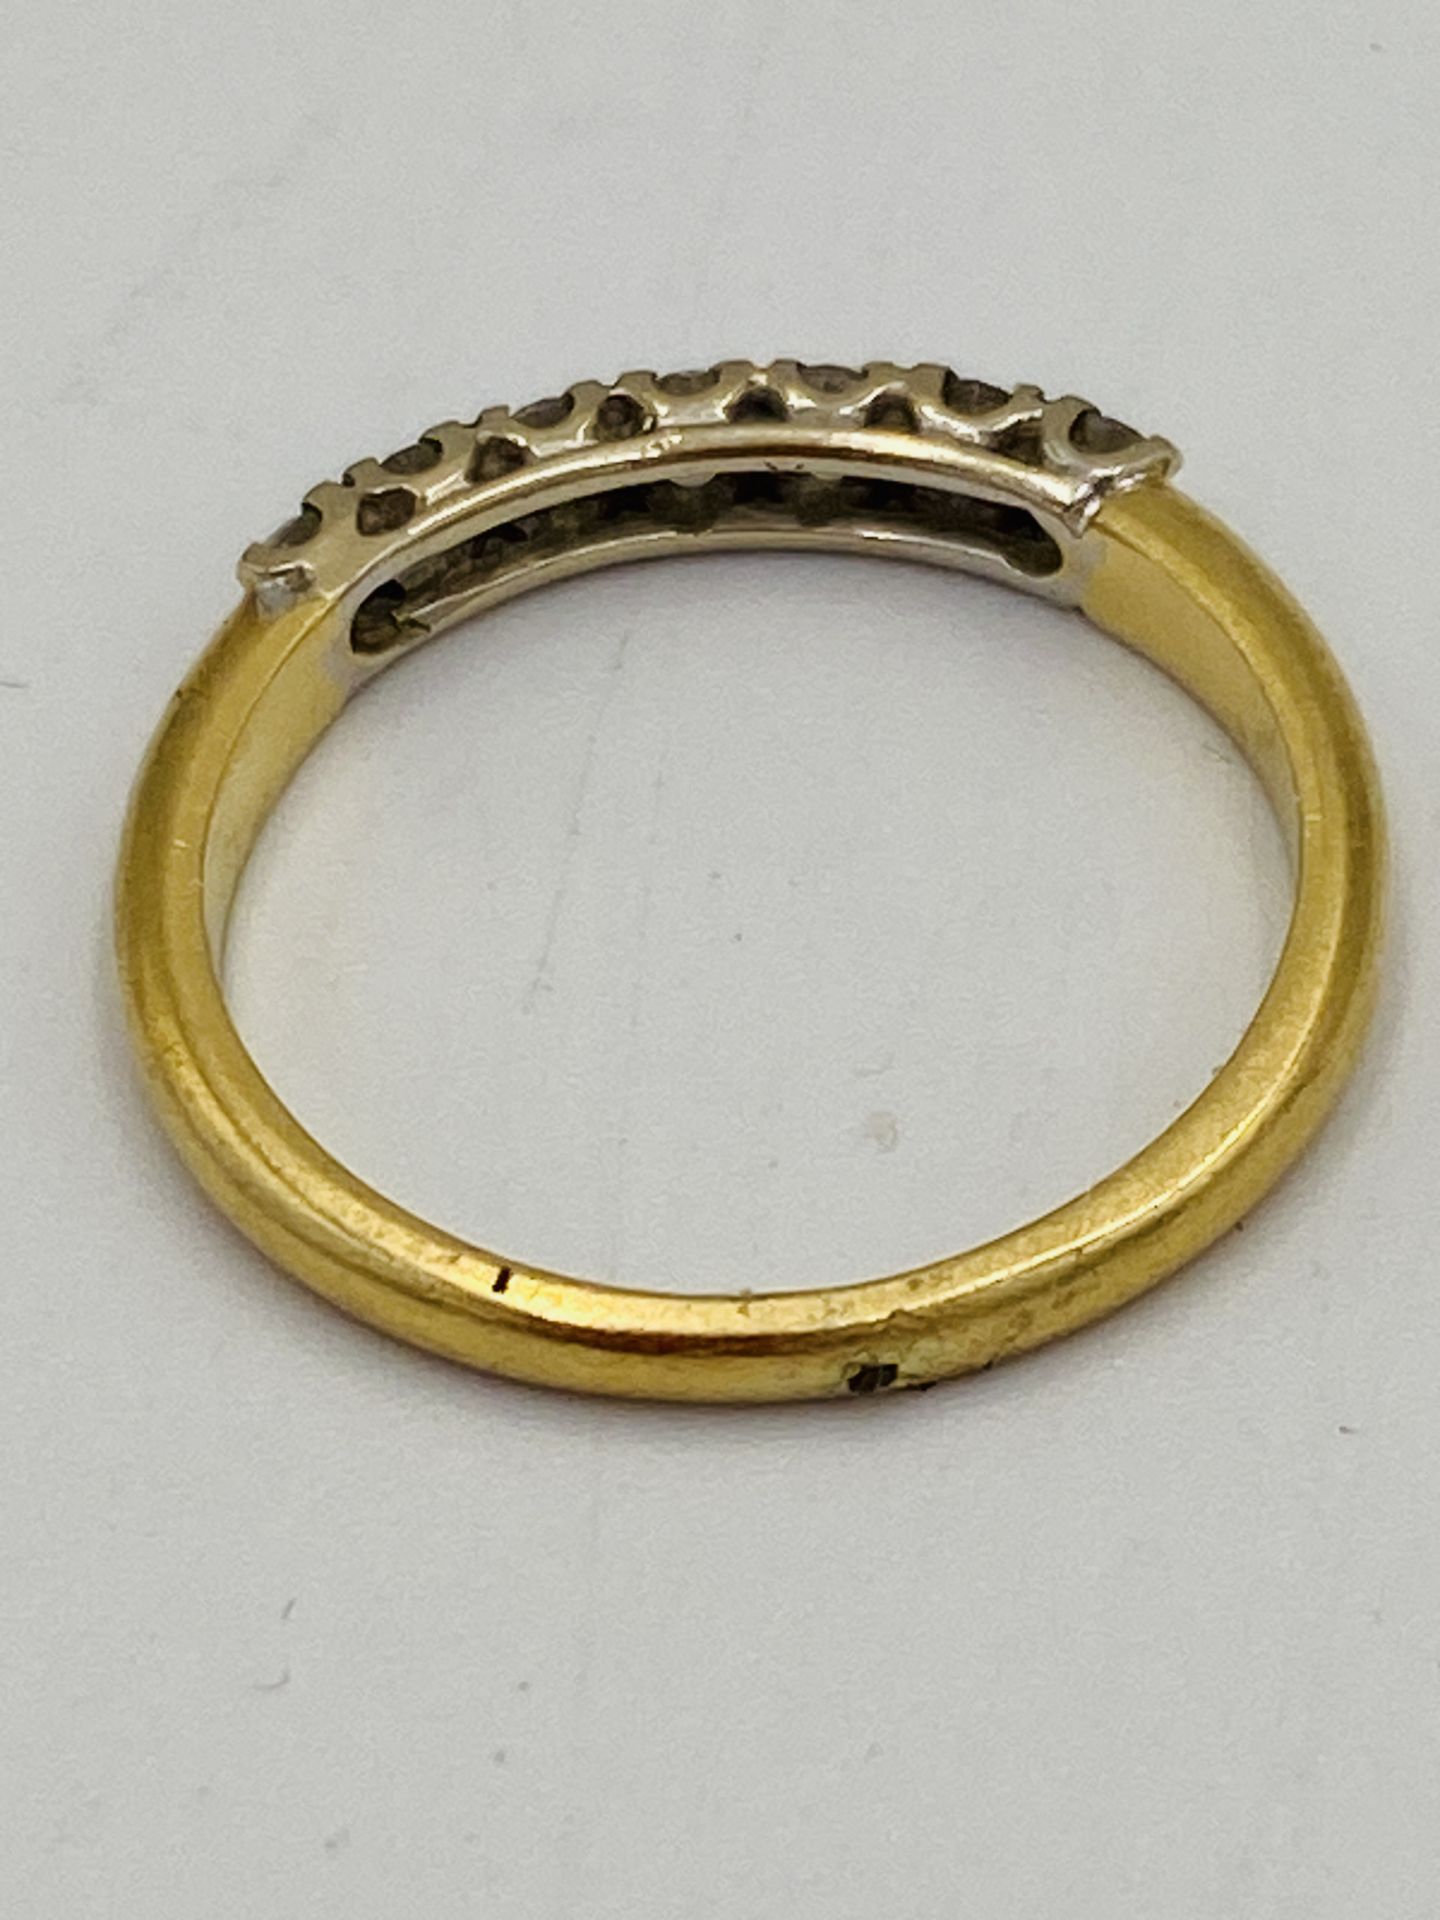 18ct gold and diamond ring - Image 3 of 4